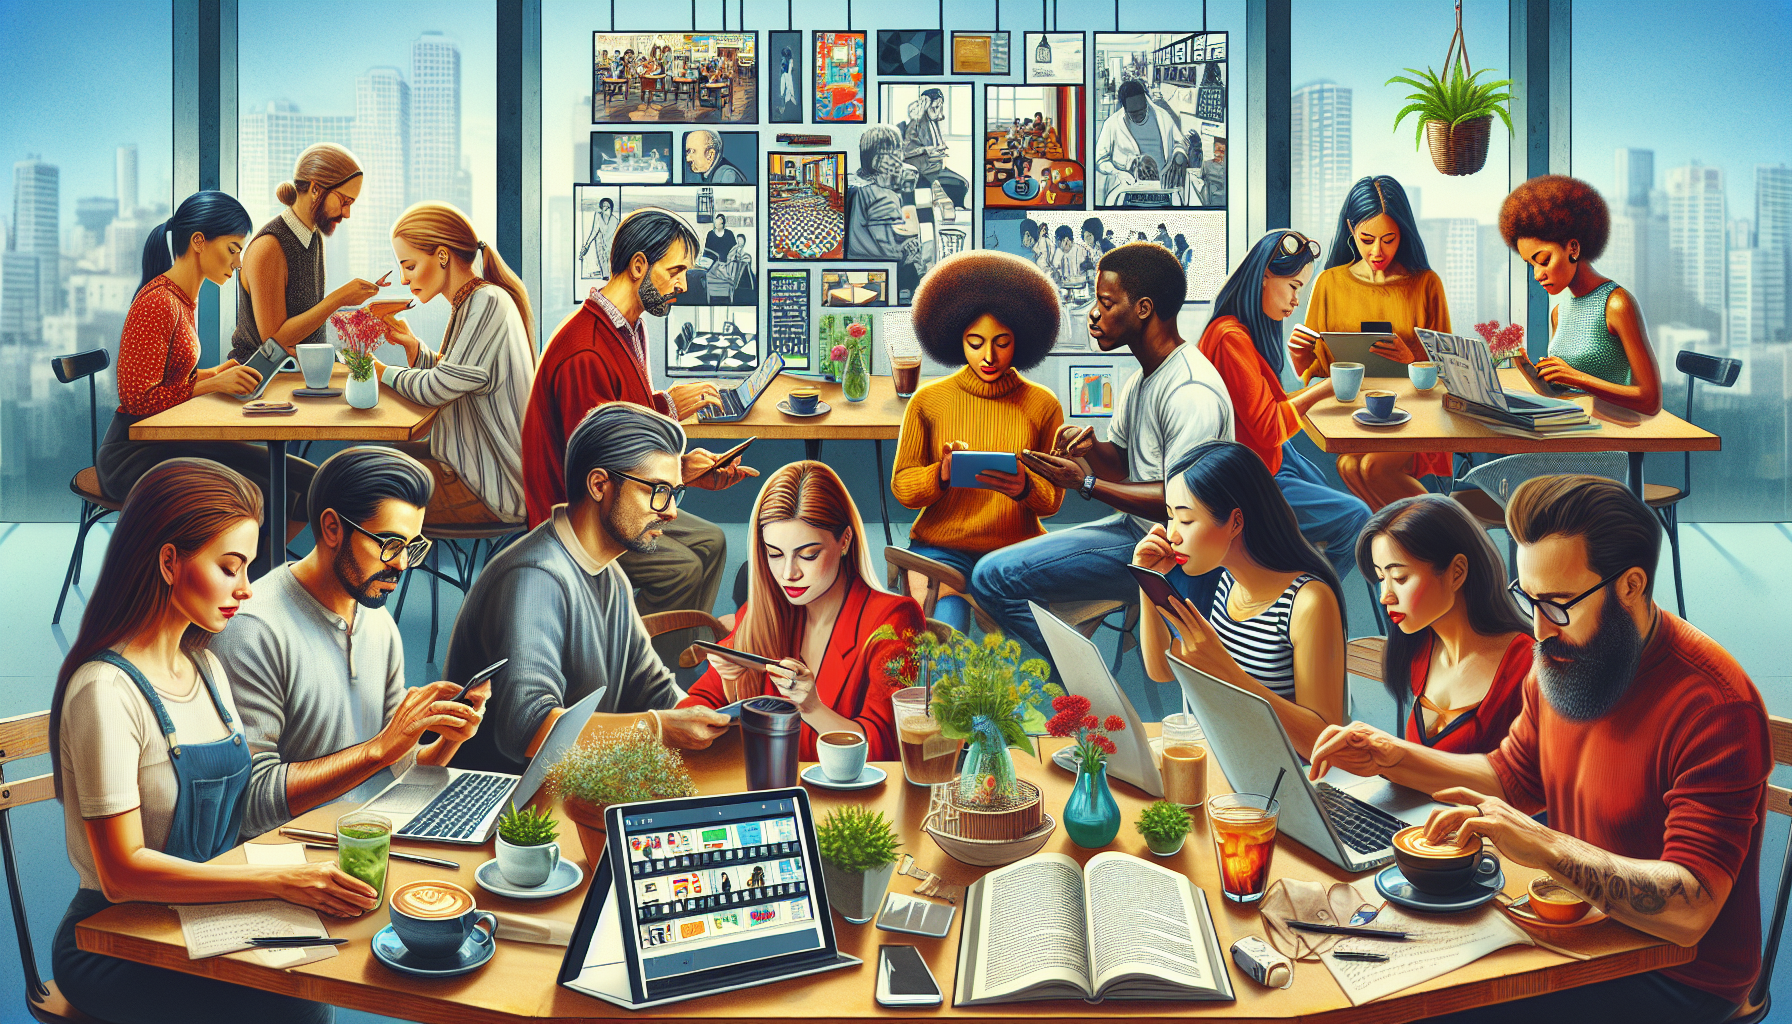 A digital collage showing a diverse group of people using various devices (tablets, smartphones, laptops) in a cozy, modern cafe setting, each screen displaying a different popular screenwriting app,